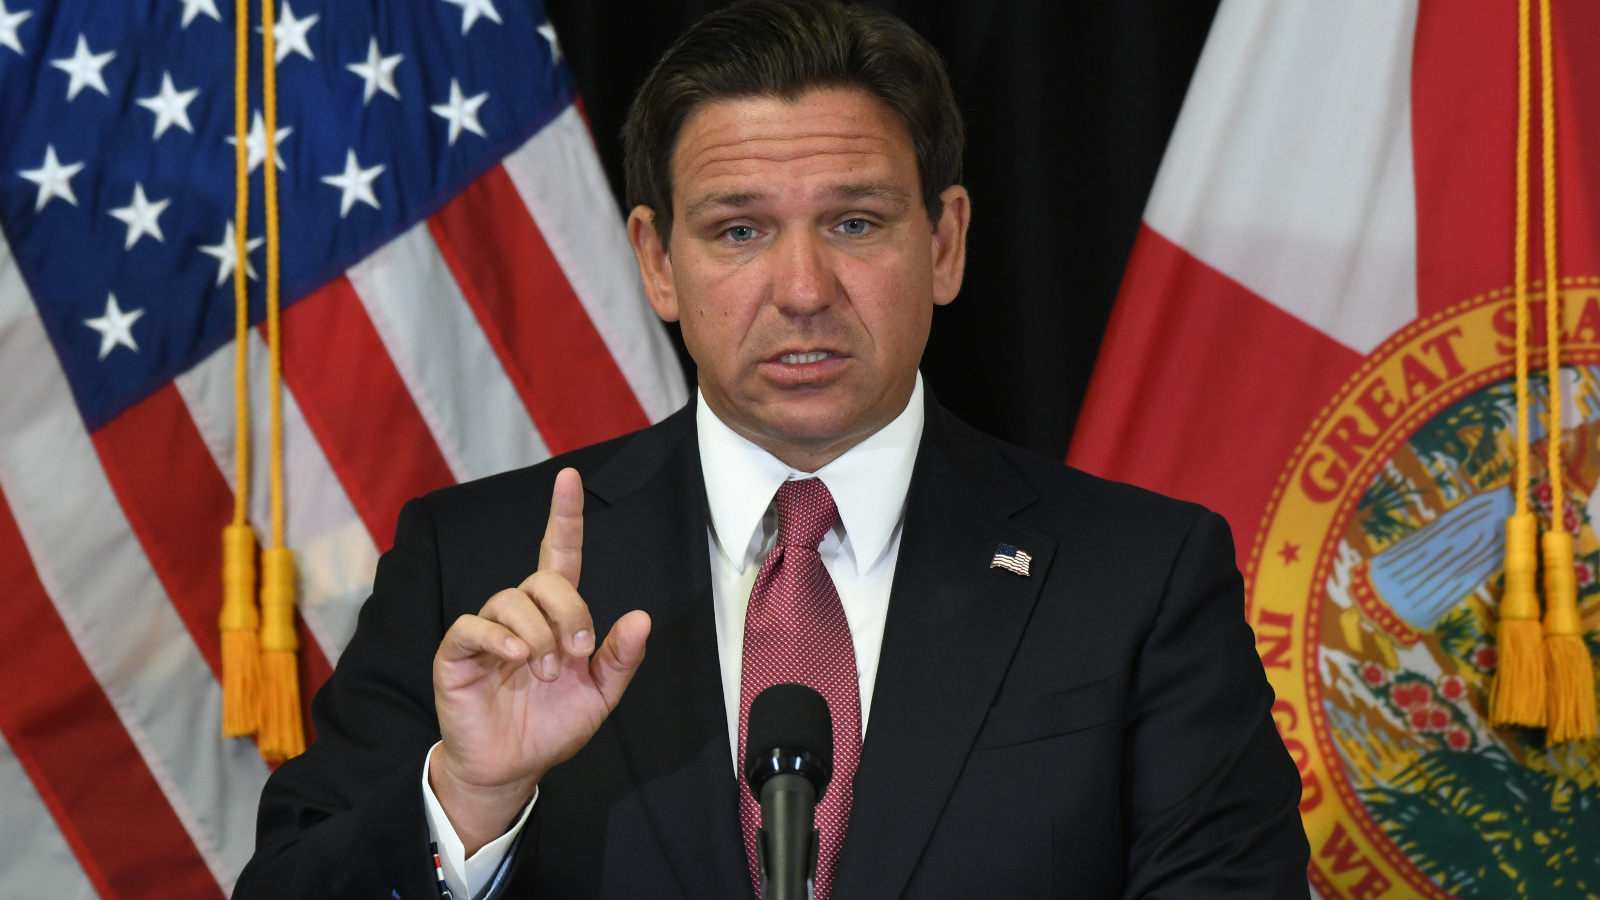 Photo of Ron DeSantis holding a finger up next to a flag